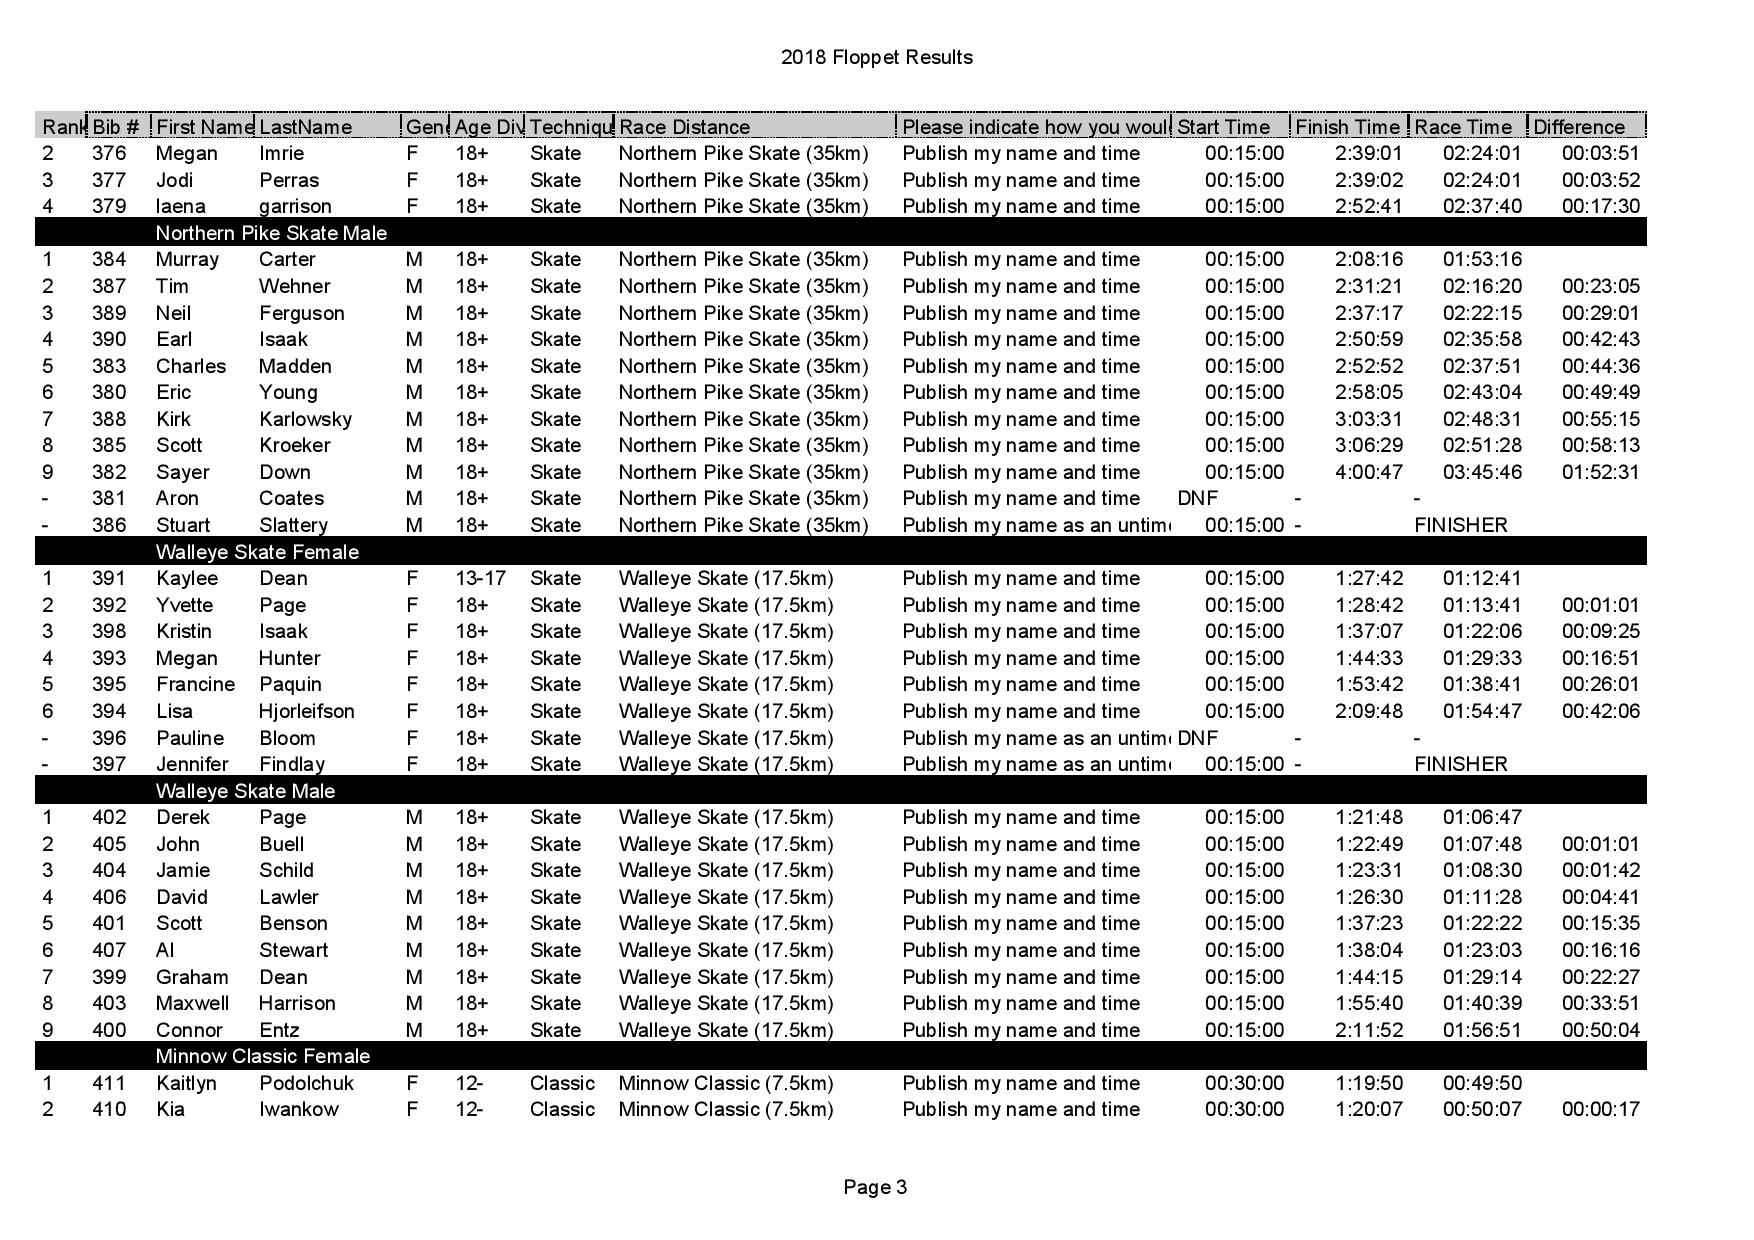 2018 Final Results - 2018 Floppet Results(1)-page-003.jpg